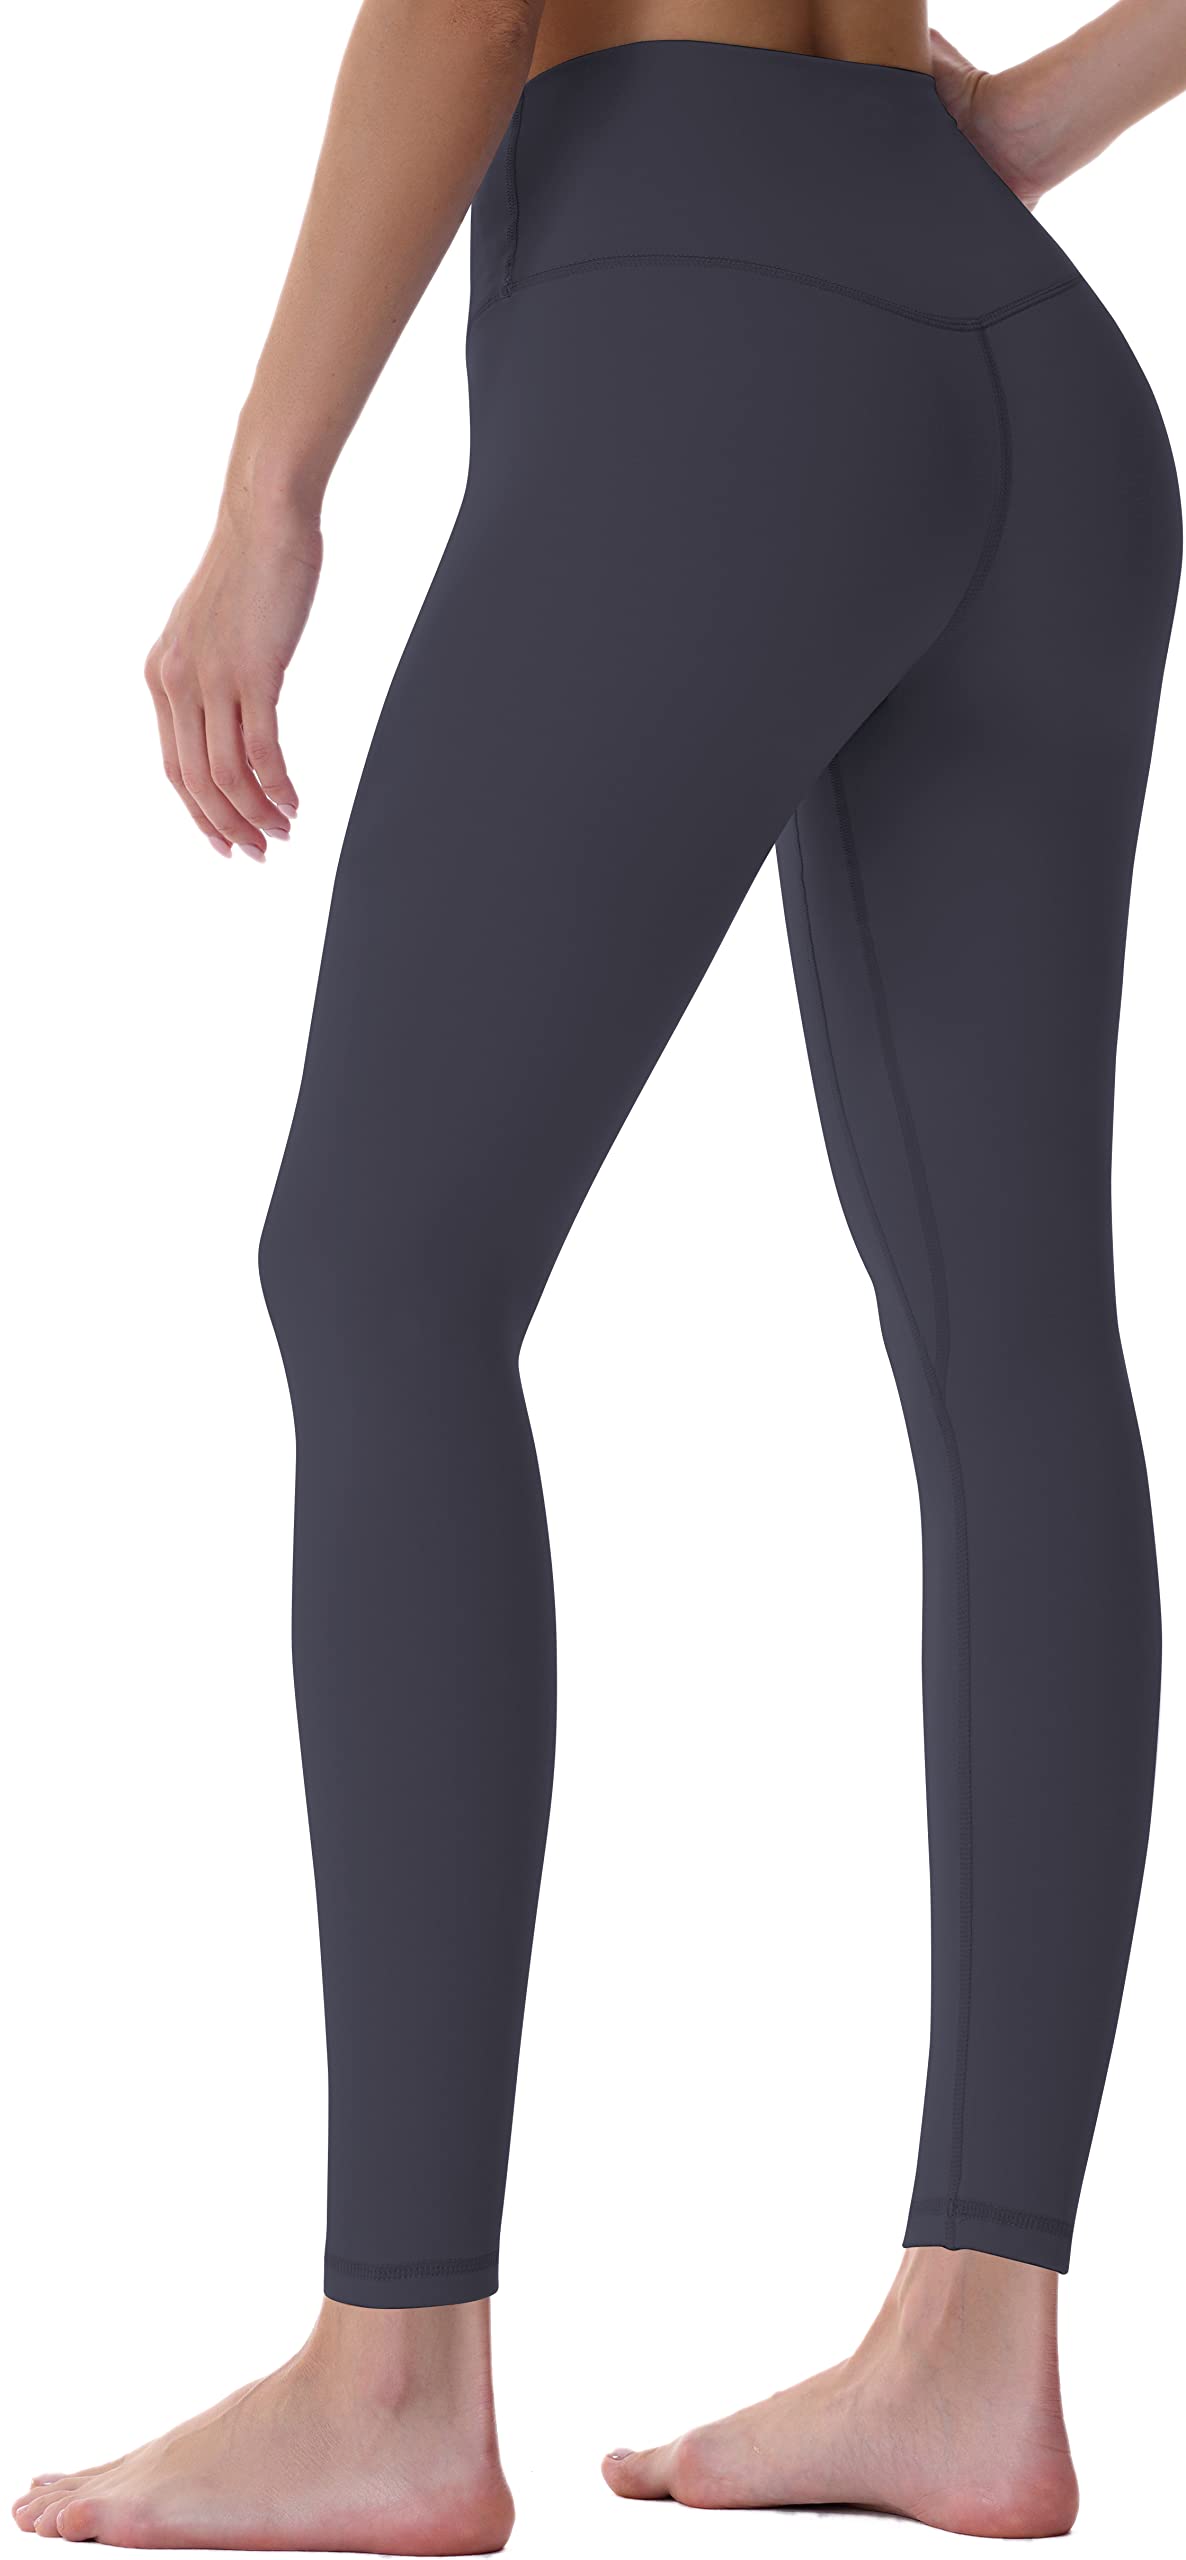 Sunzel Workout Leggings for Women, Squat Proof High Waisted Yoga, Buttery  Soft Size M - $14 New With Tags - From Dustin